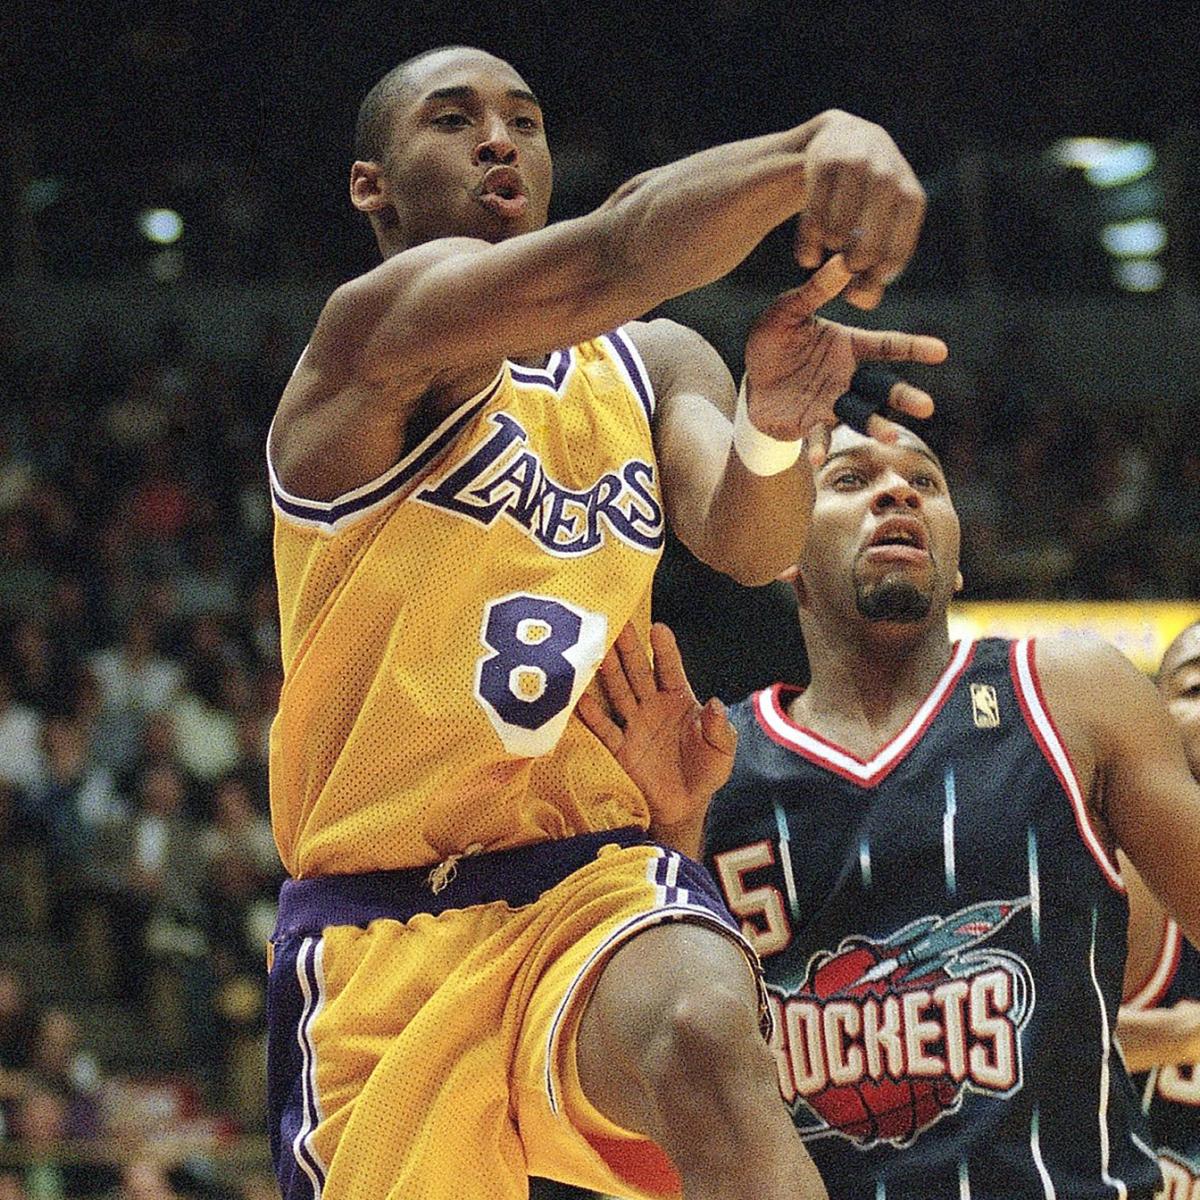 Kobe Bryant game-worn jersey from 1997 fetches $2.73 million